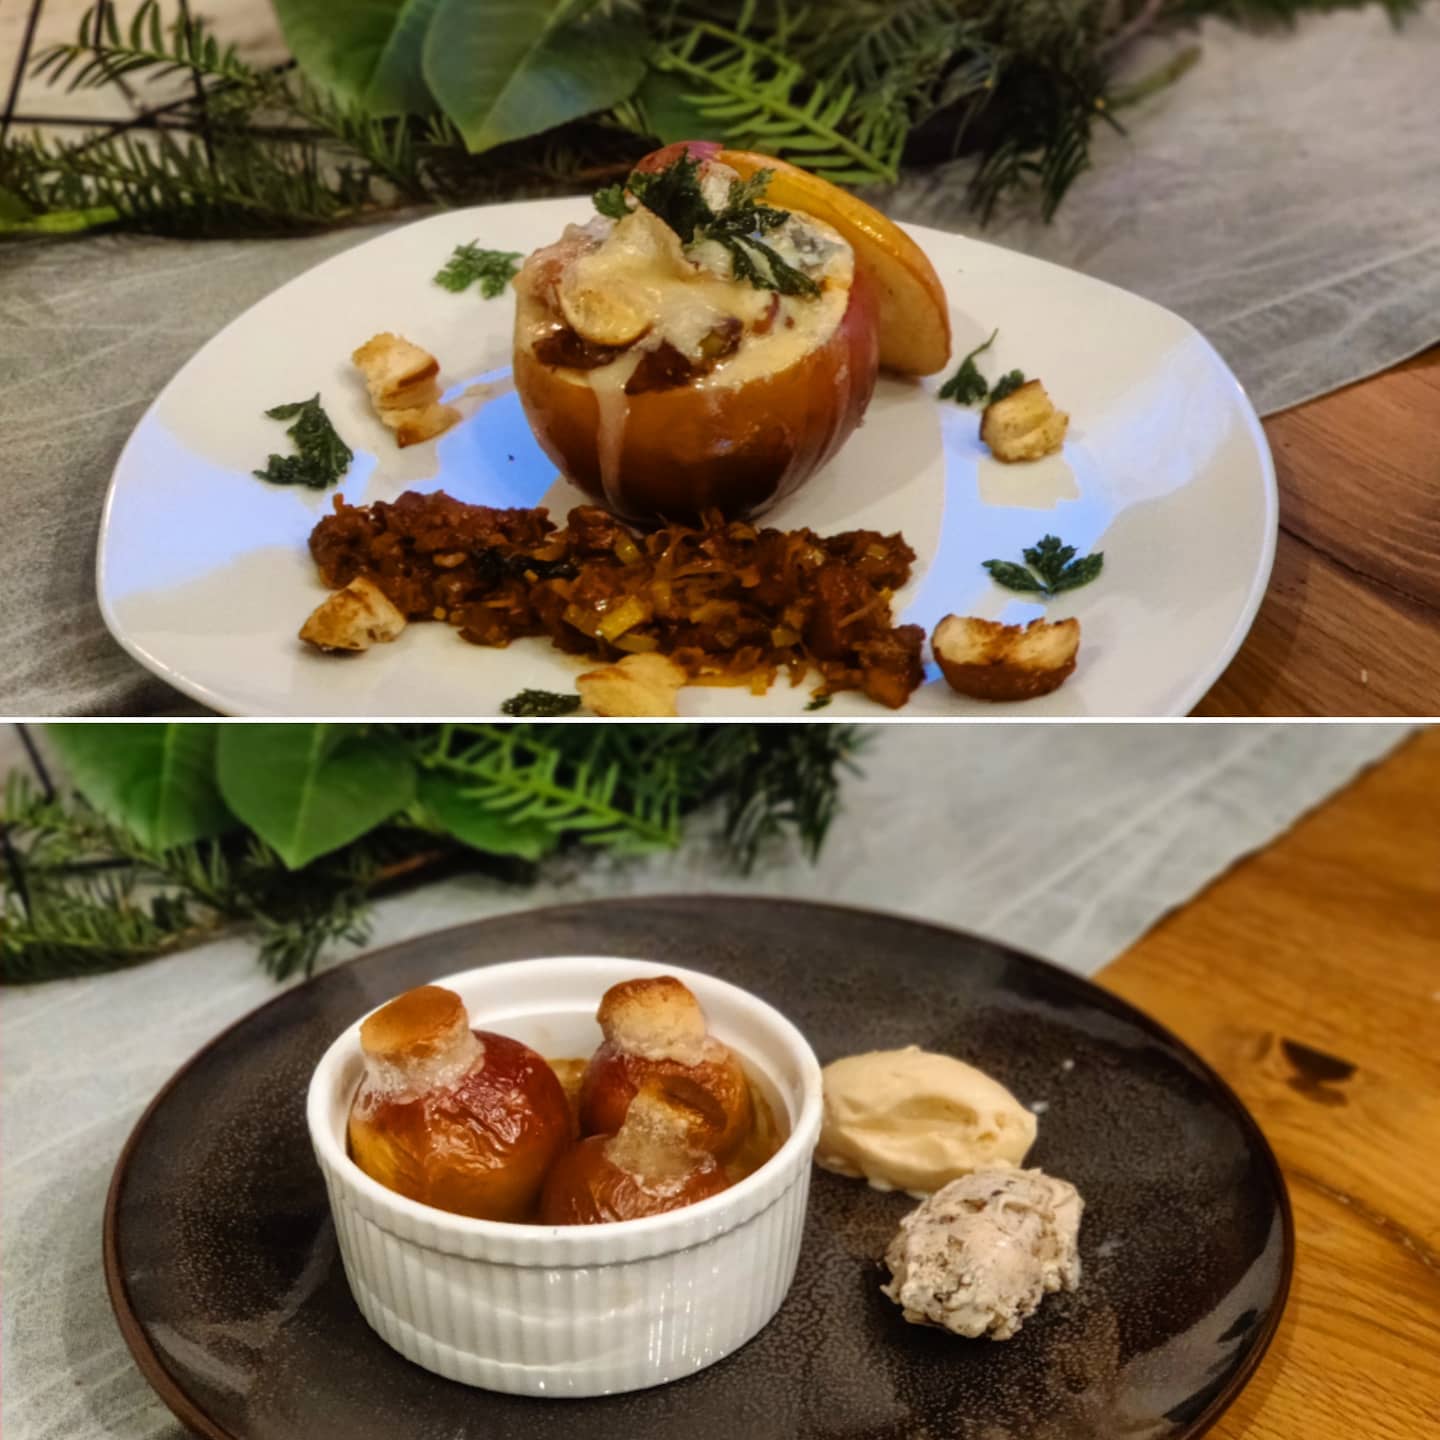 An #apple a day keeps the doctor away.

#Vegetarian #sunday menu: Apple stuffed with ragout, pretzels and some gorgonzola as a first course, then classic (German) mini baked apples with self made apple juice (own apple tree) marzipan, raisins and cinnamon.